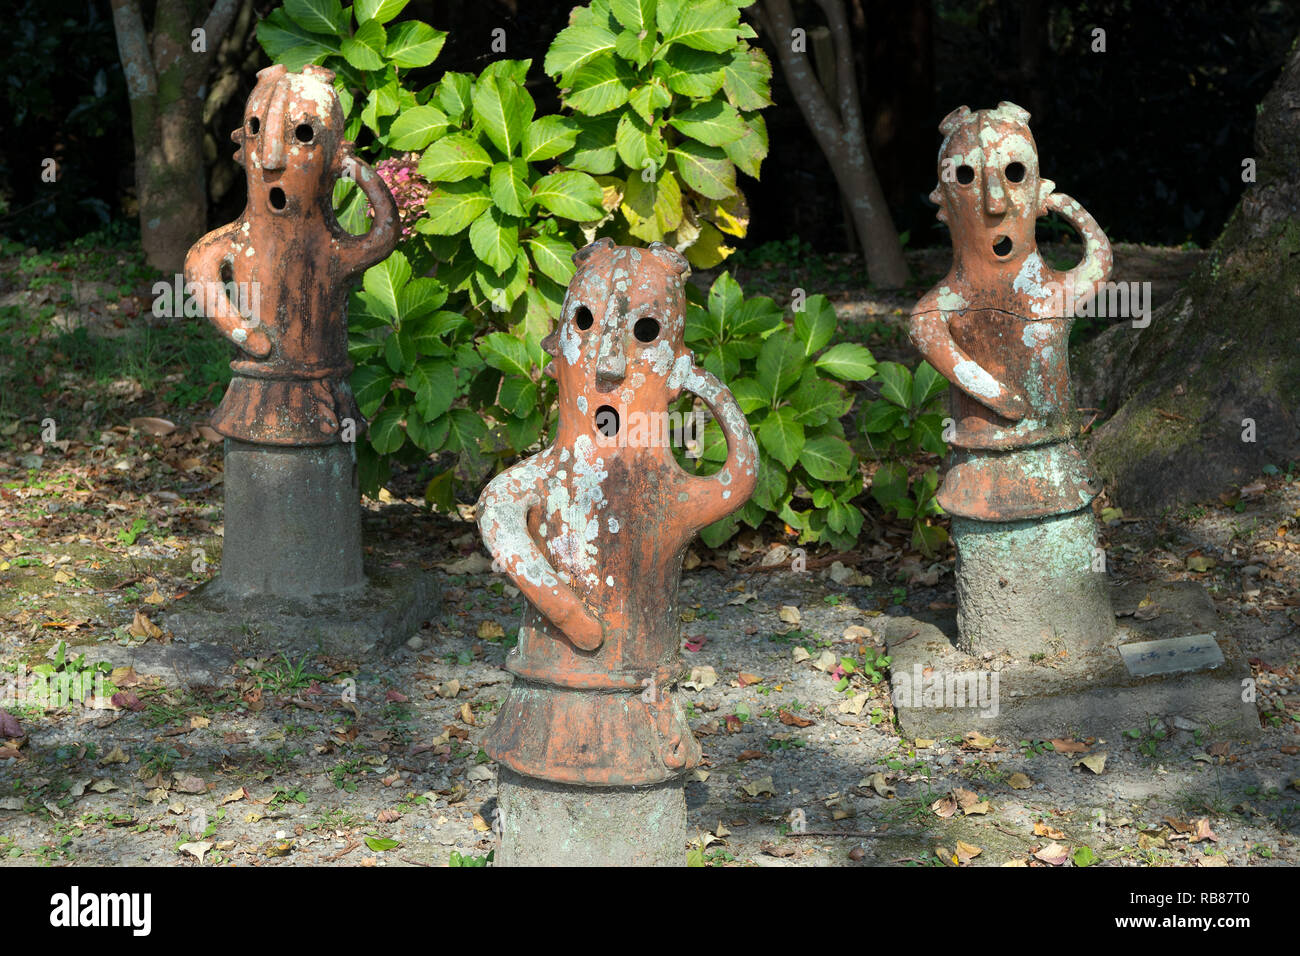 Miyazaki, Japan - November 5, 2018:  Haniwa Garden in Heiwadai Park with earthenware replicas of burial statues found all over the country in Japan Stock Photo